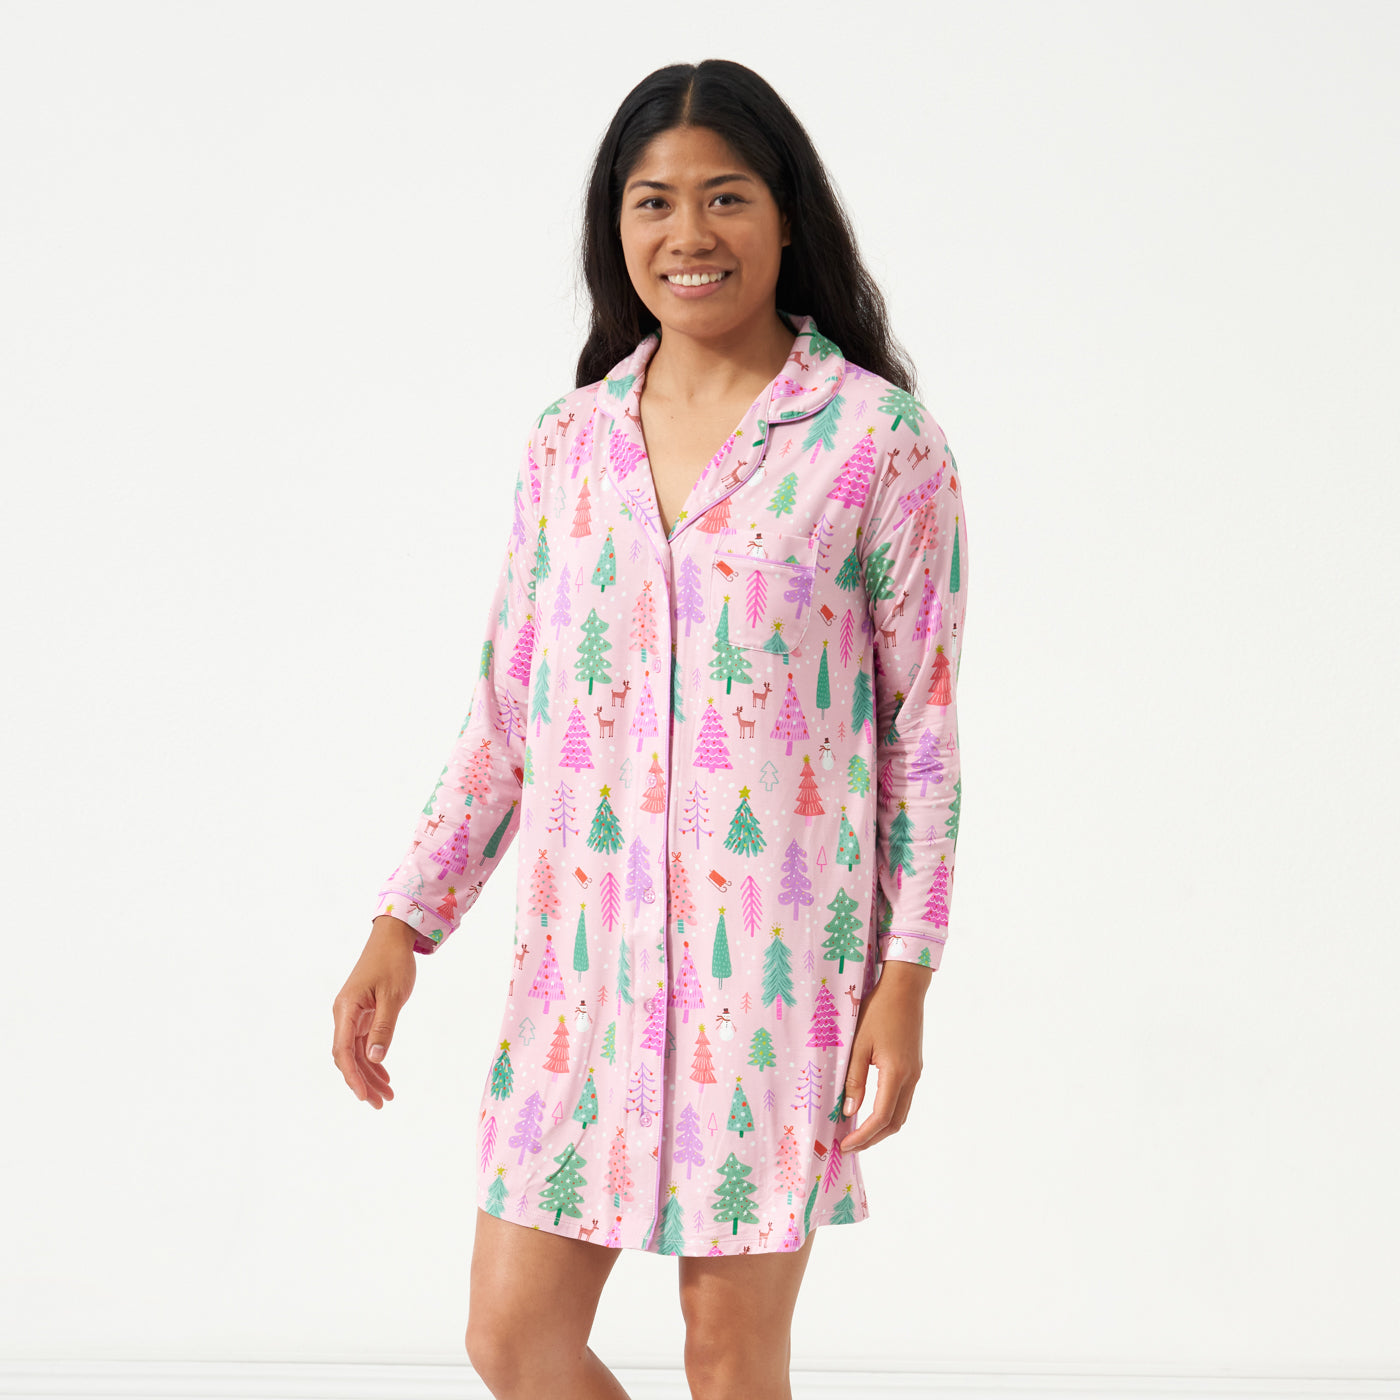 Woman wearing a Pink Merry and Bright women's sleep shirt